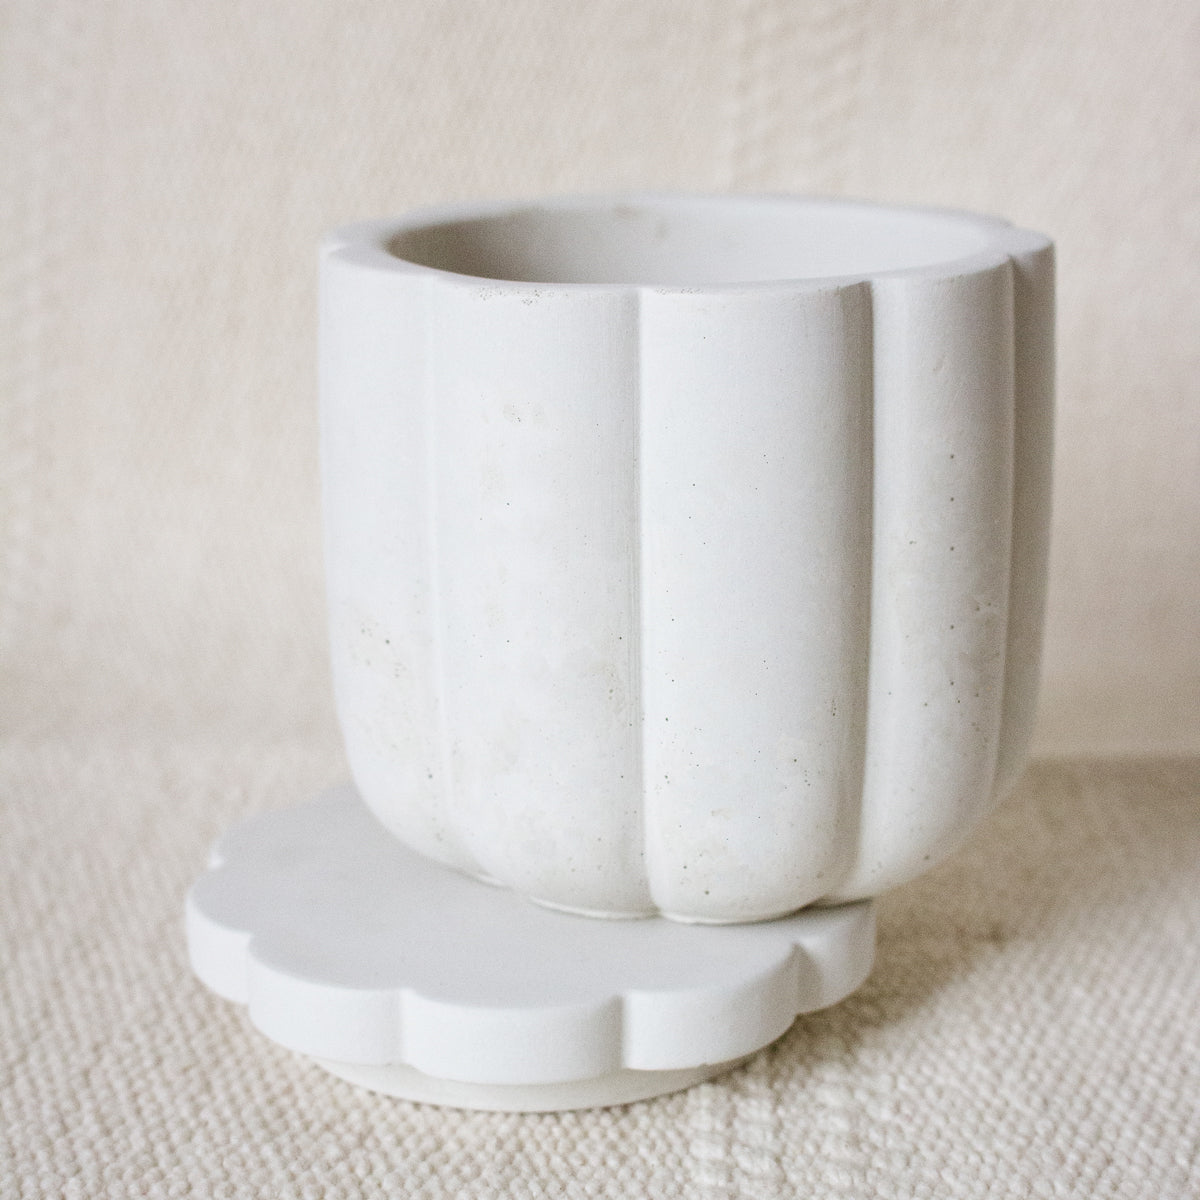 7oz Empty Concrete Candle Vessel with Lid - Scallop Style